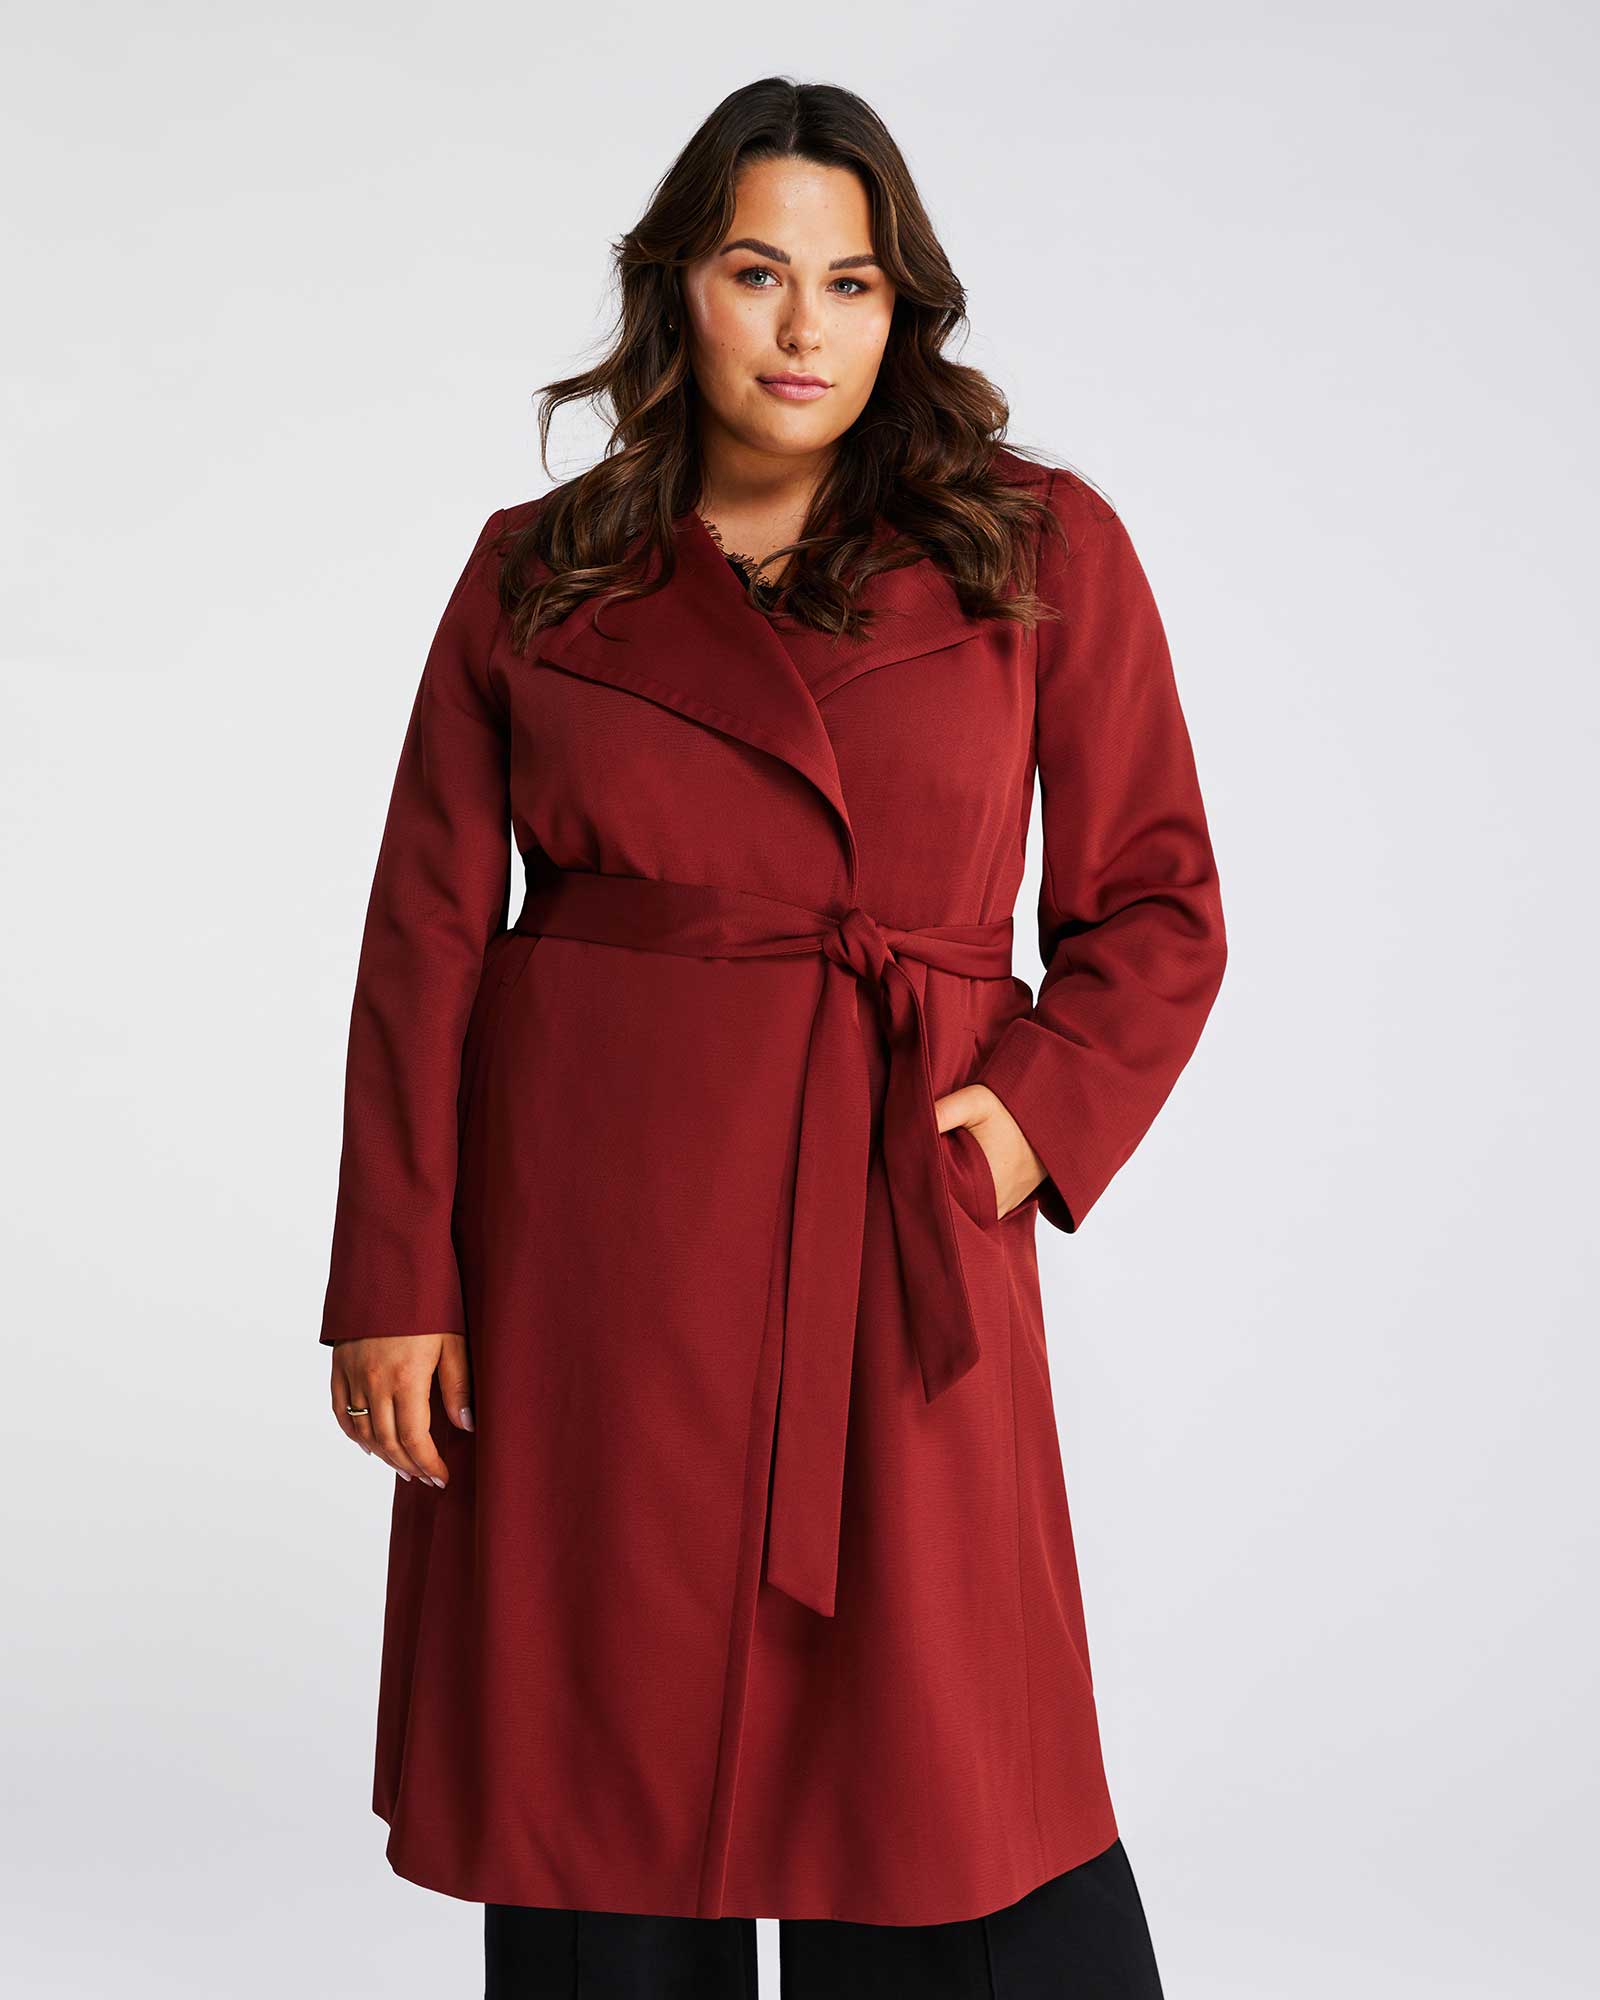 Fall Fashion for the Plus-Size Woman: Embrace Elegance and Comfort